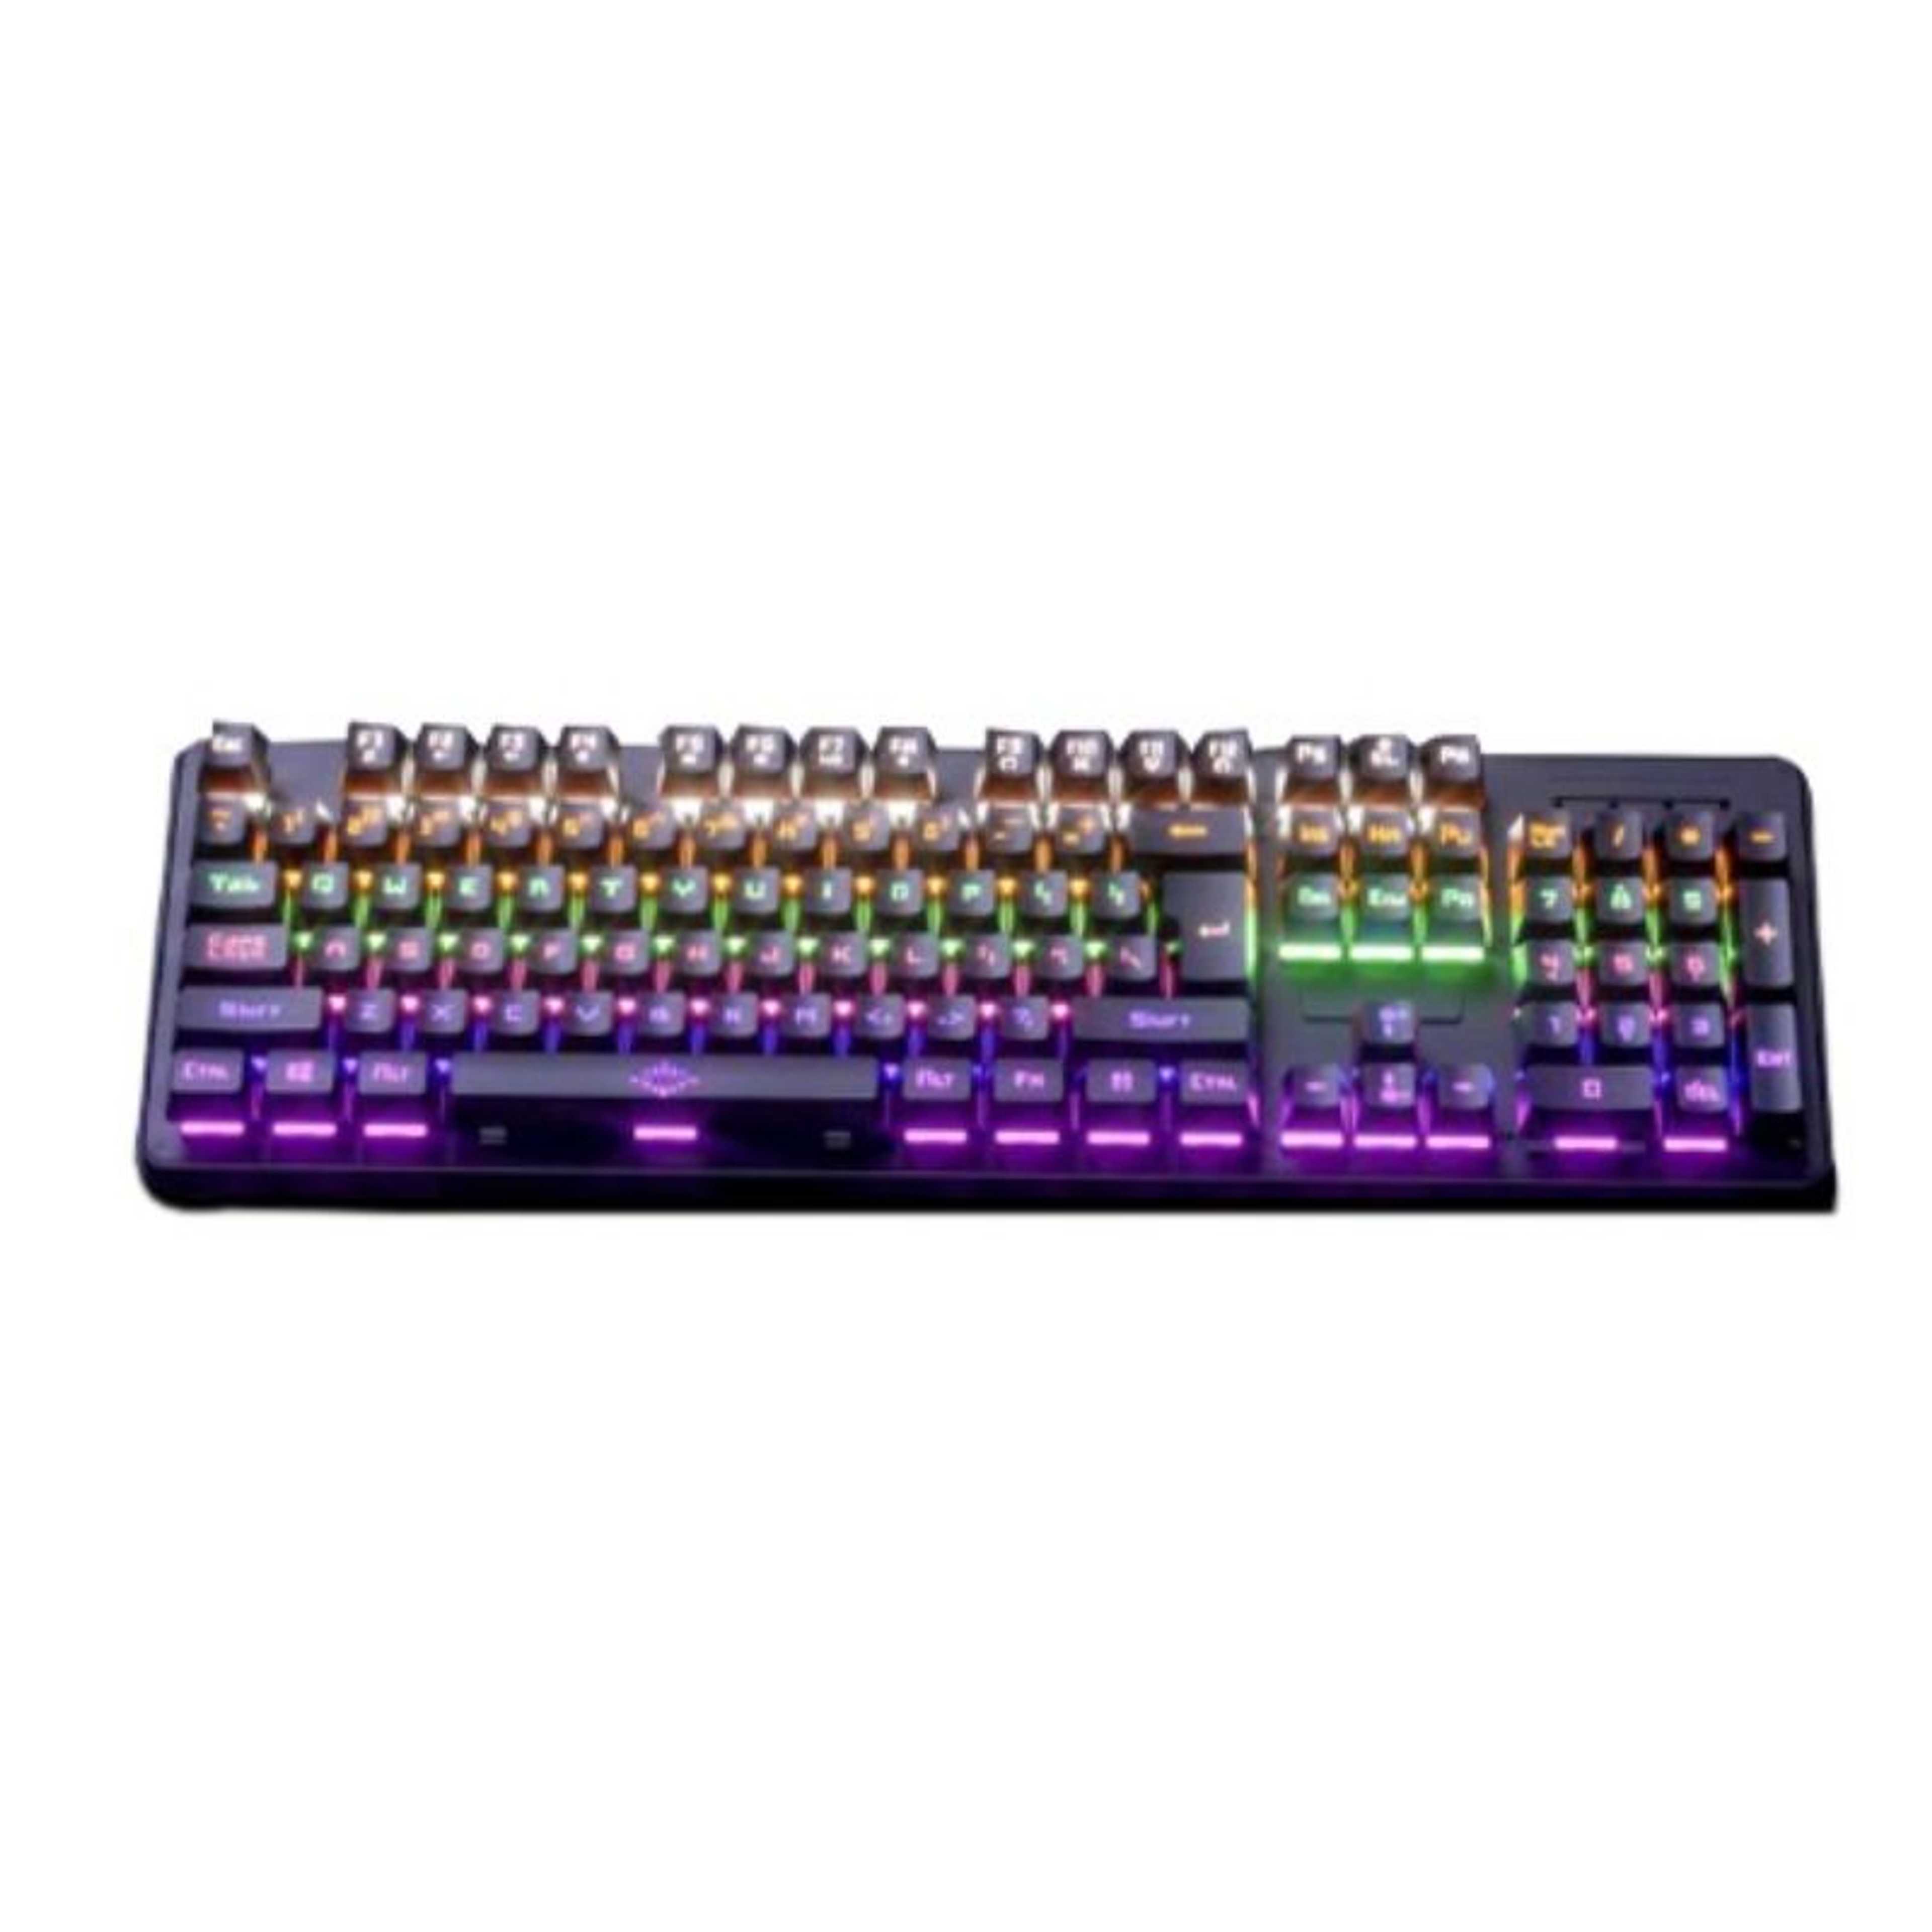 JEDEL KL89 Mechanical Gaming RGB Wired Keyboard